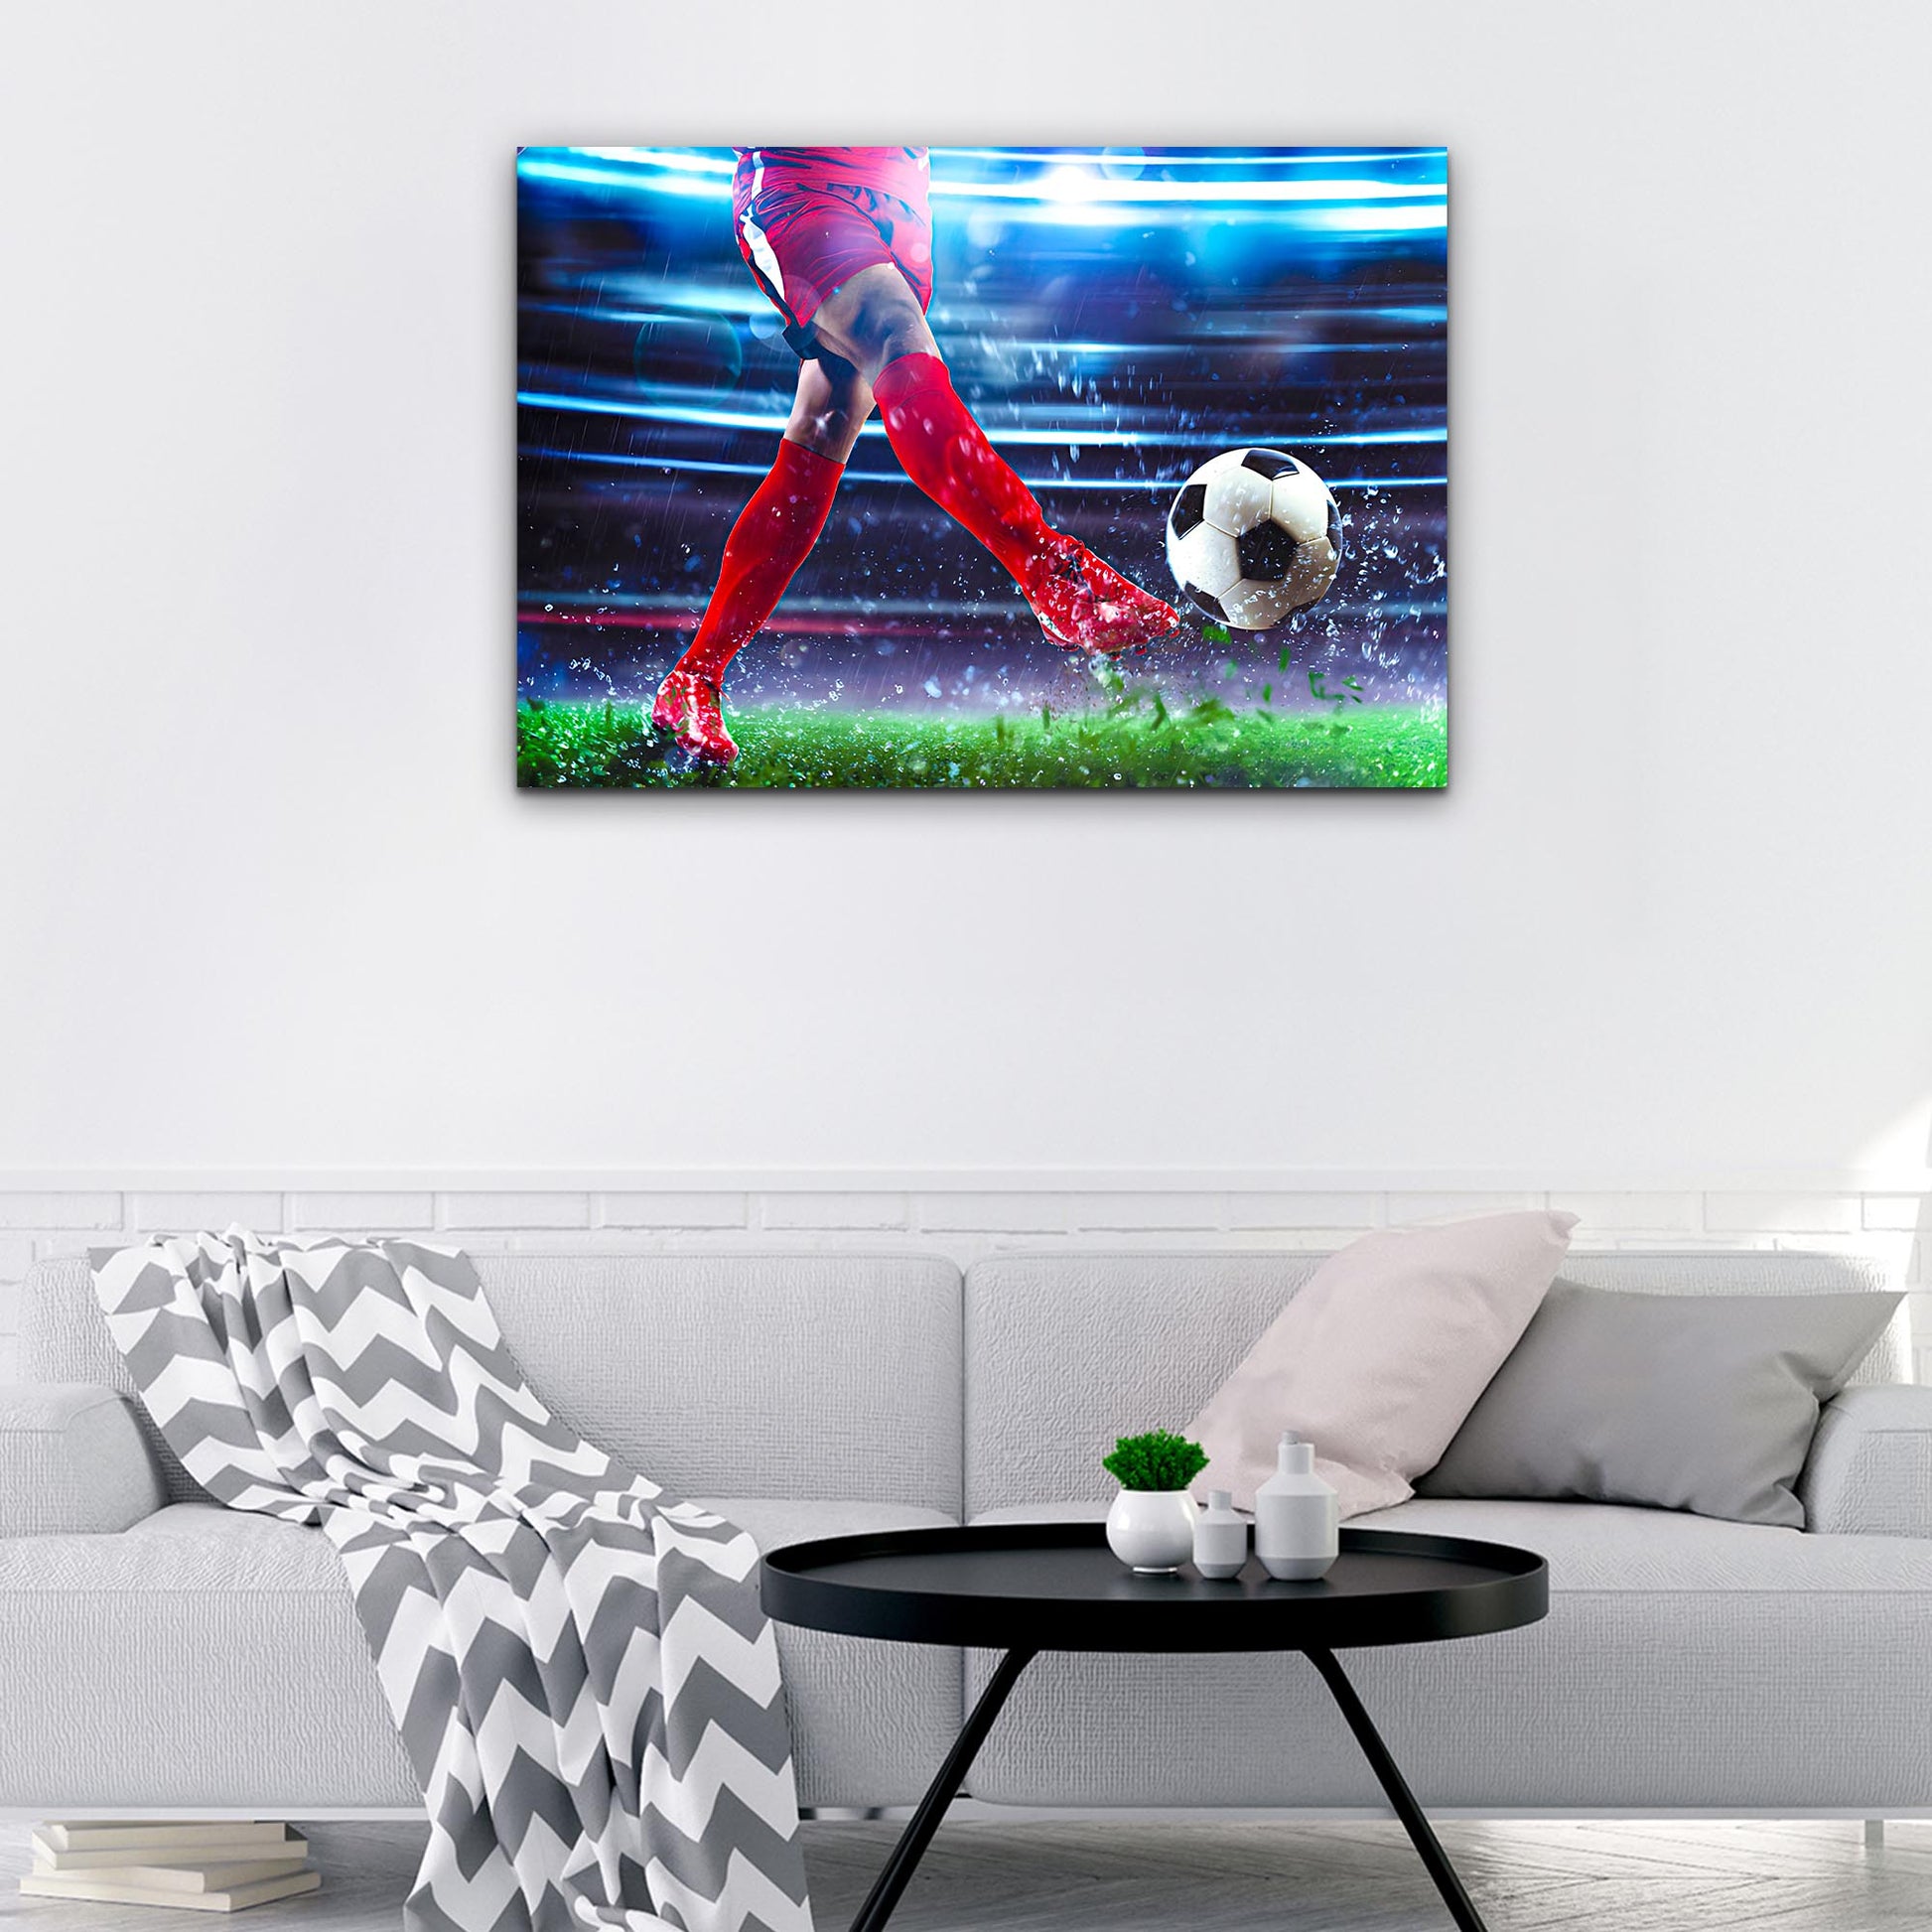 Soccer Kick Grunge Canvas Wall Art  - Image by Tailored Canvases